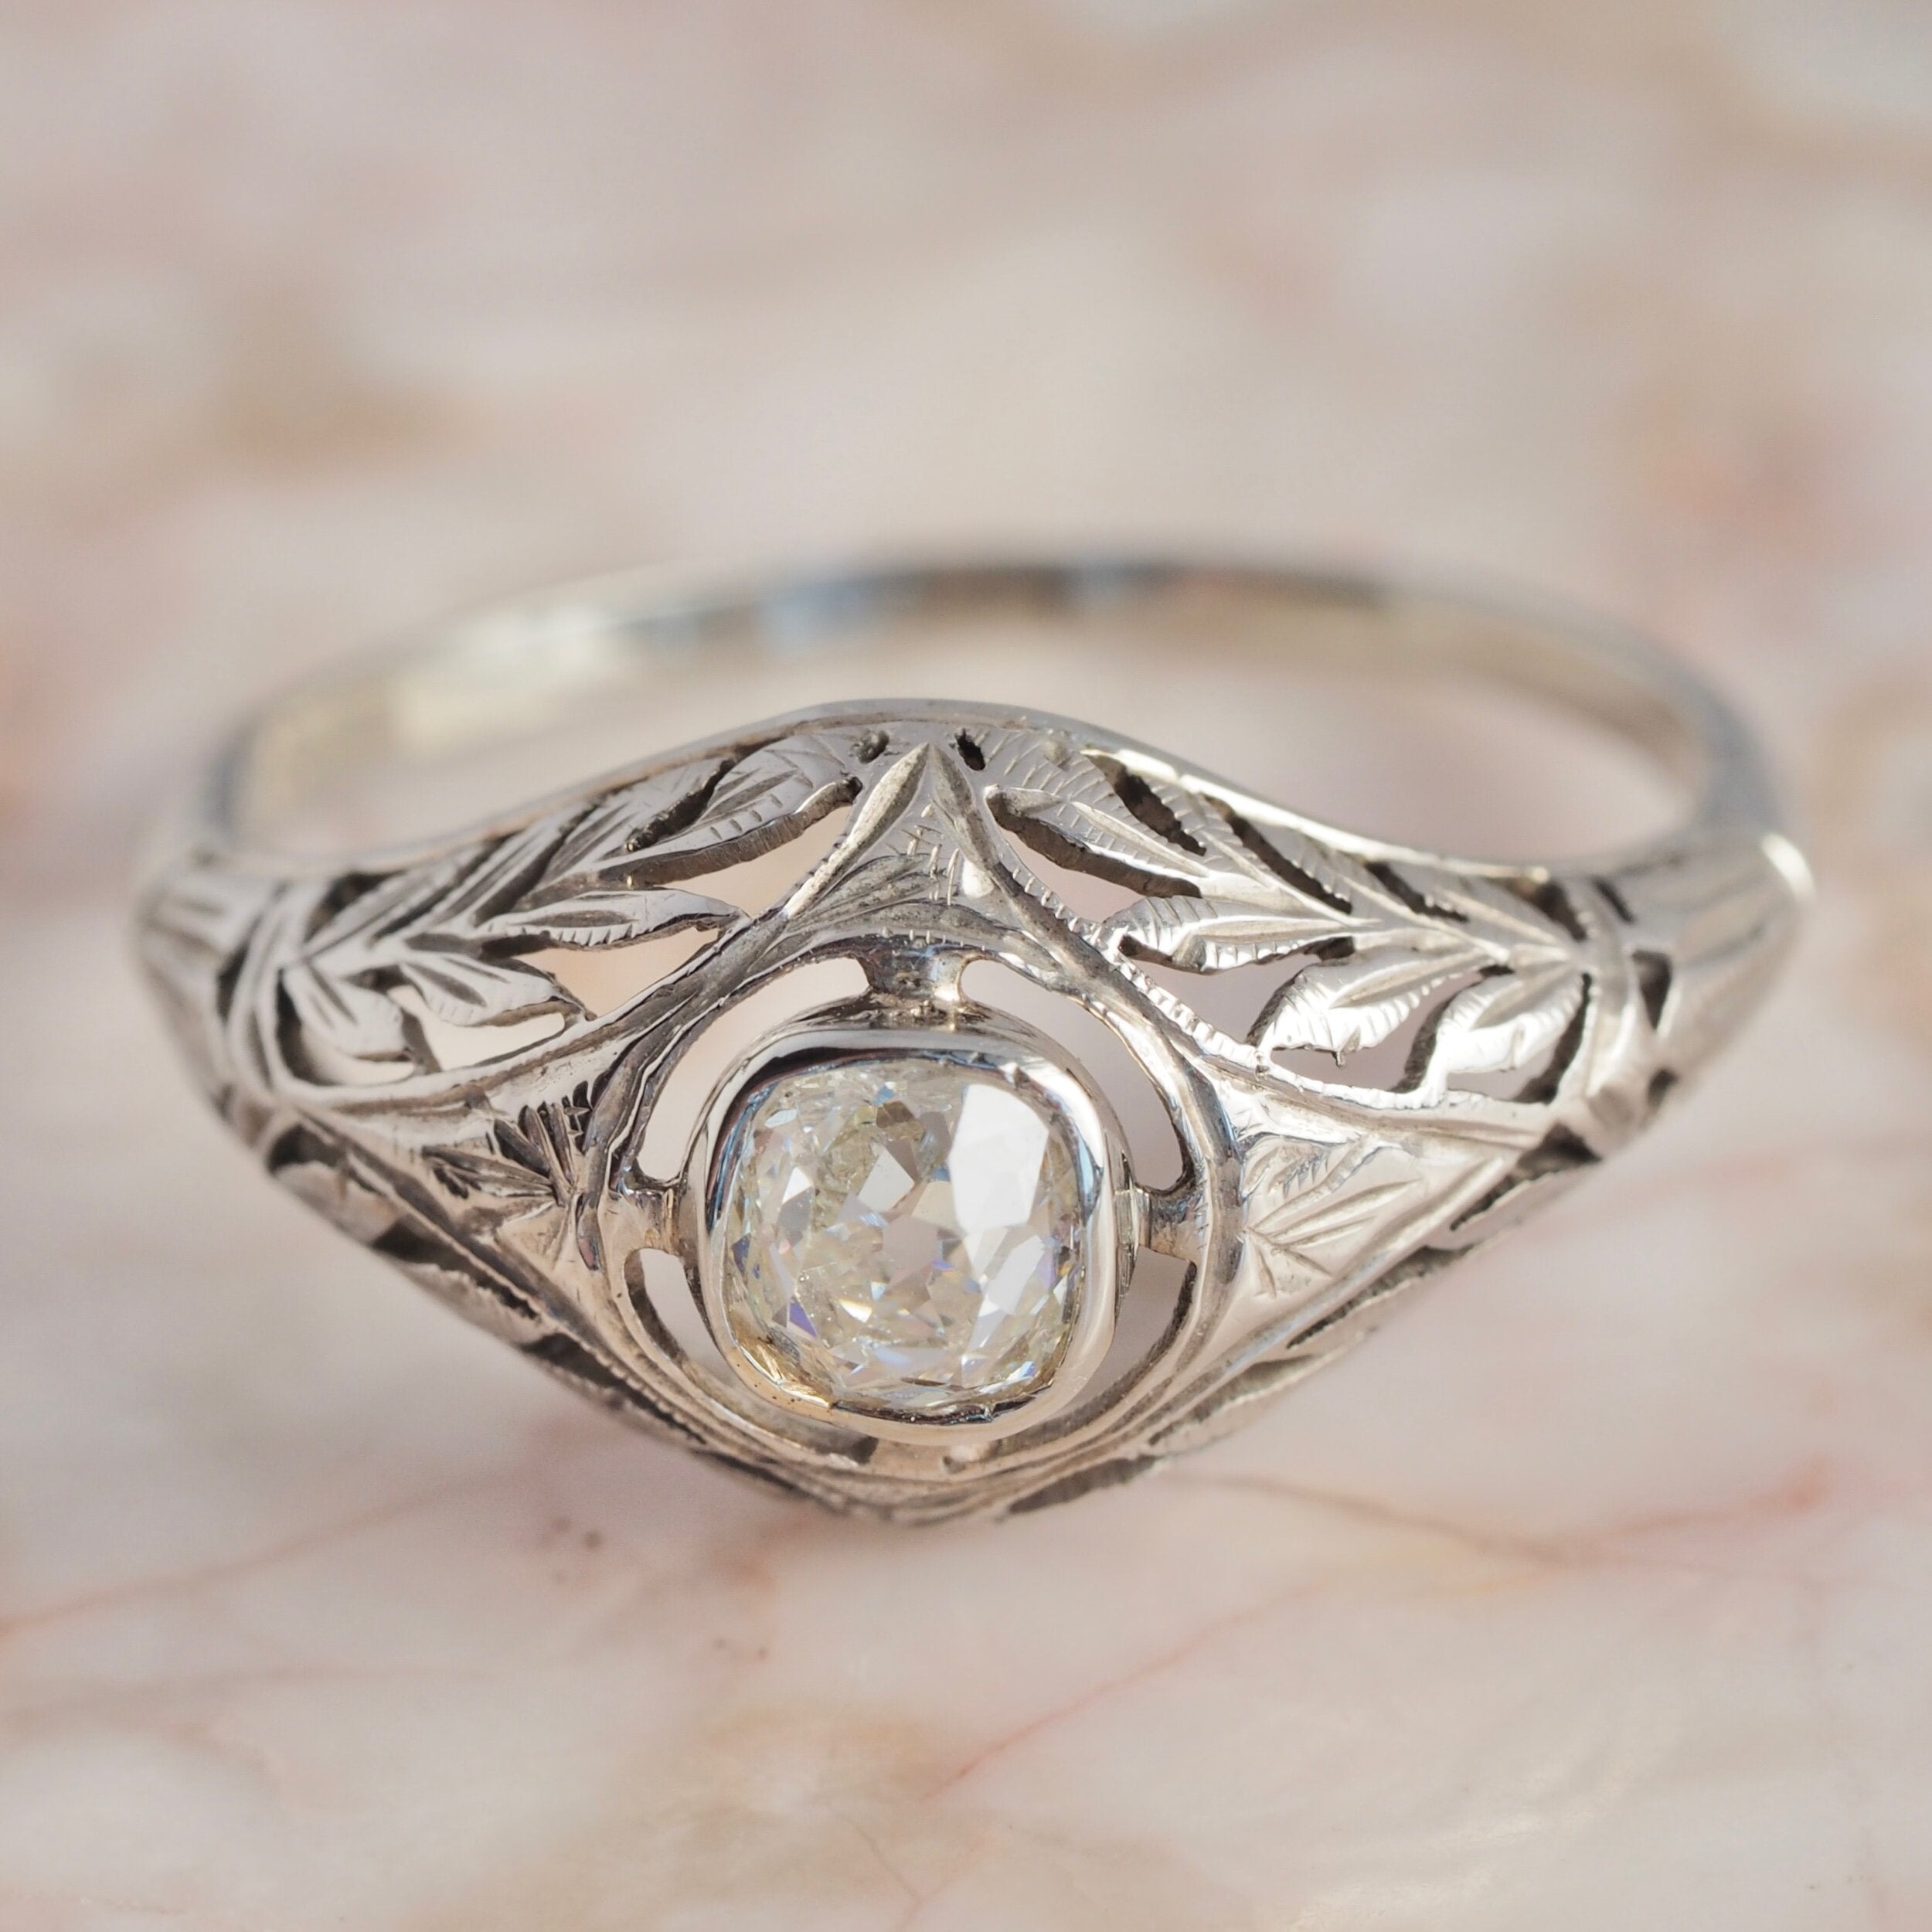 Belle Etoile Diana Collection sterling silver ring. – Fey & CO.